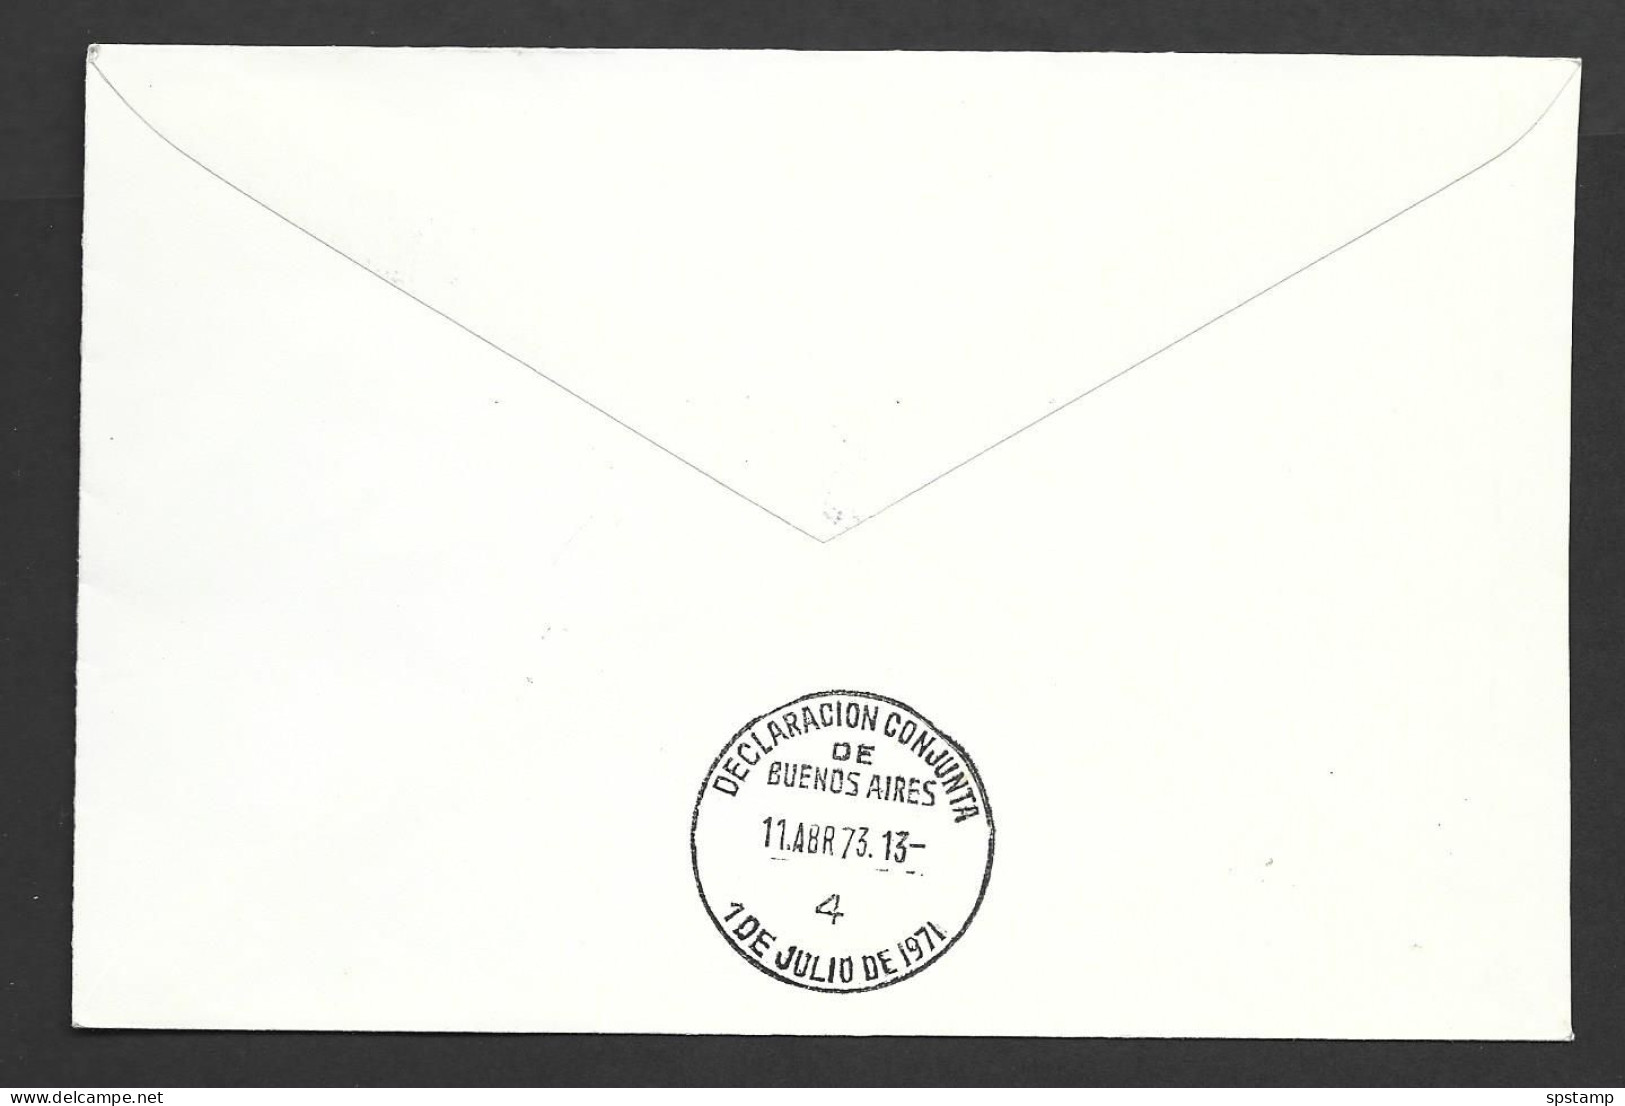 Falkland Islands 1973 Cabo San Isidro / Buenos Aires Declaration Special Cover, 1p F.I. Flower Franking , Signed - Falklandinseln